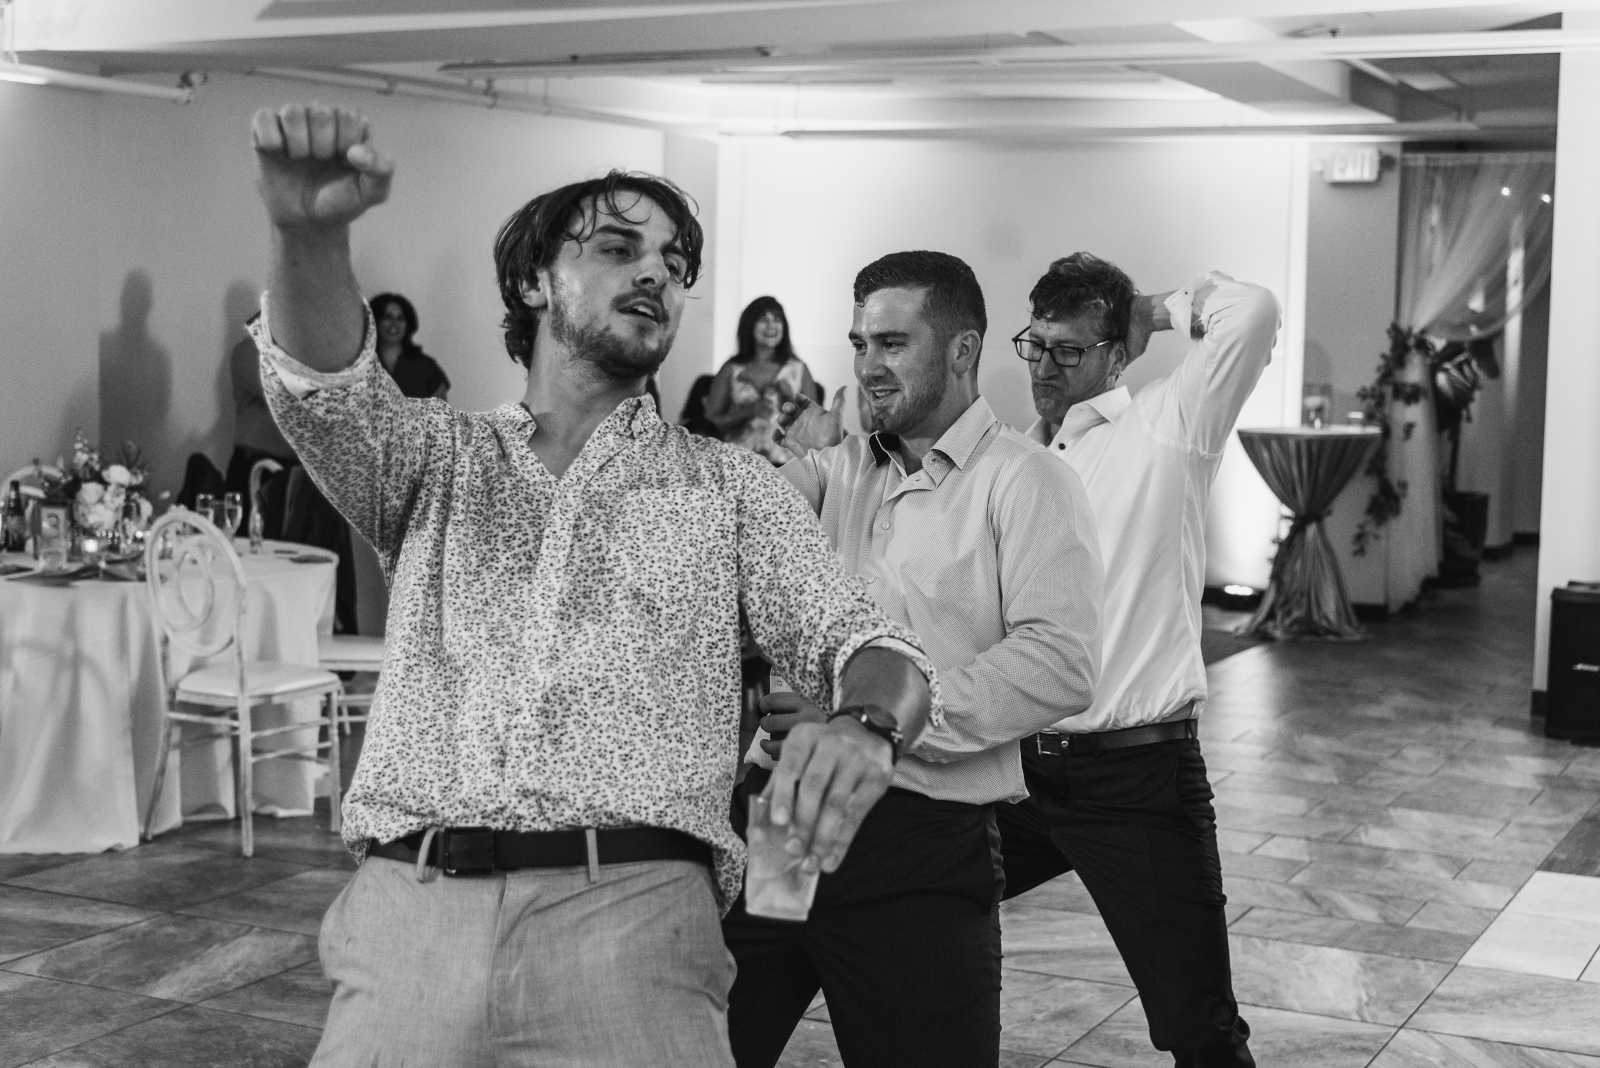 Groom dancing with friends, fun wedding photo, candid, black and white, music, wedding DJ, romantic urban wedding reception at Penthouse Events, Ohio City, Cleveland Flats